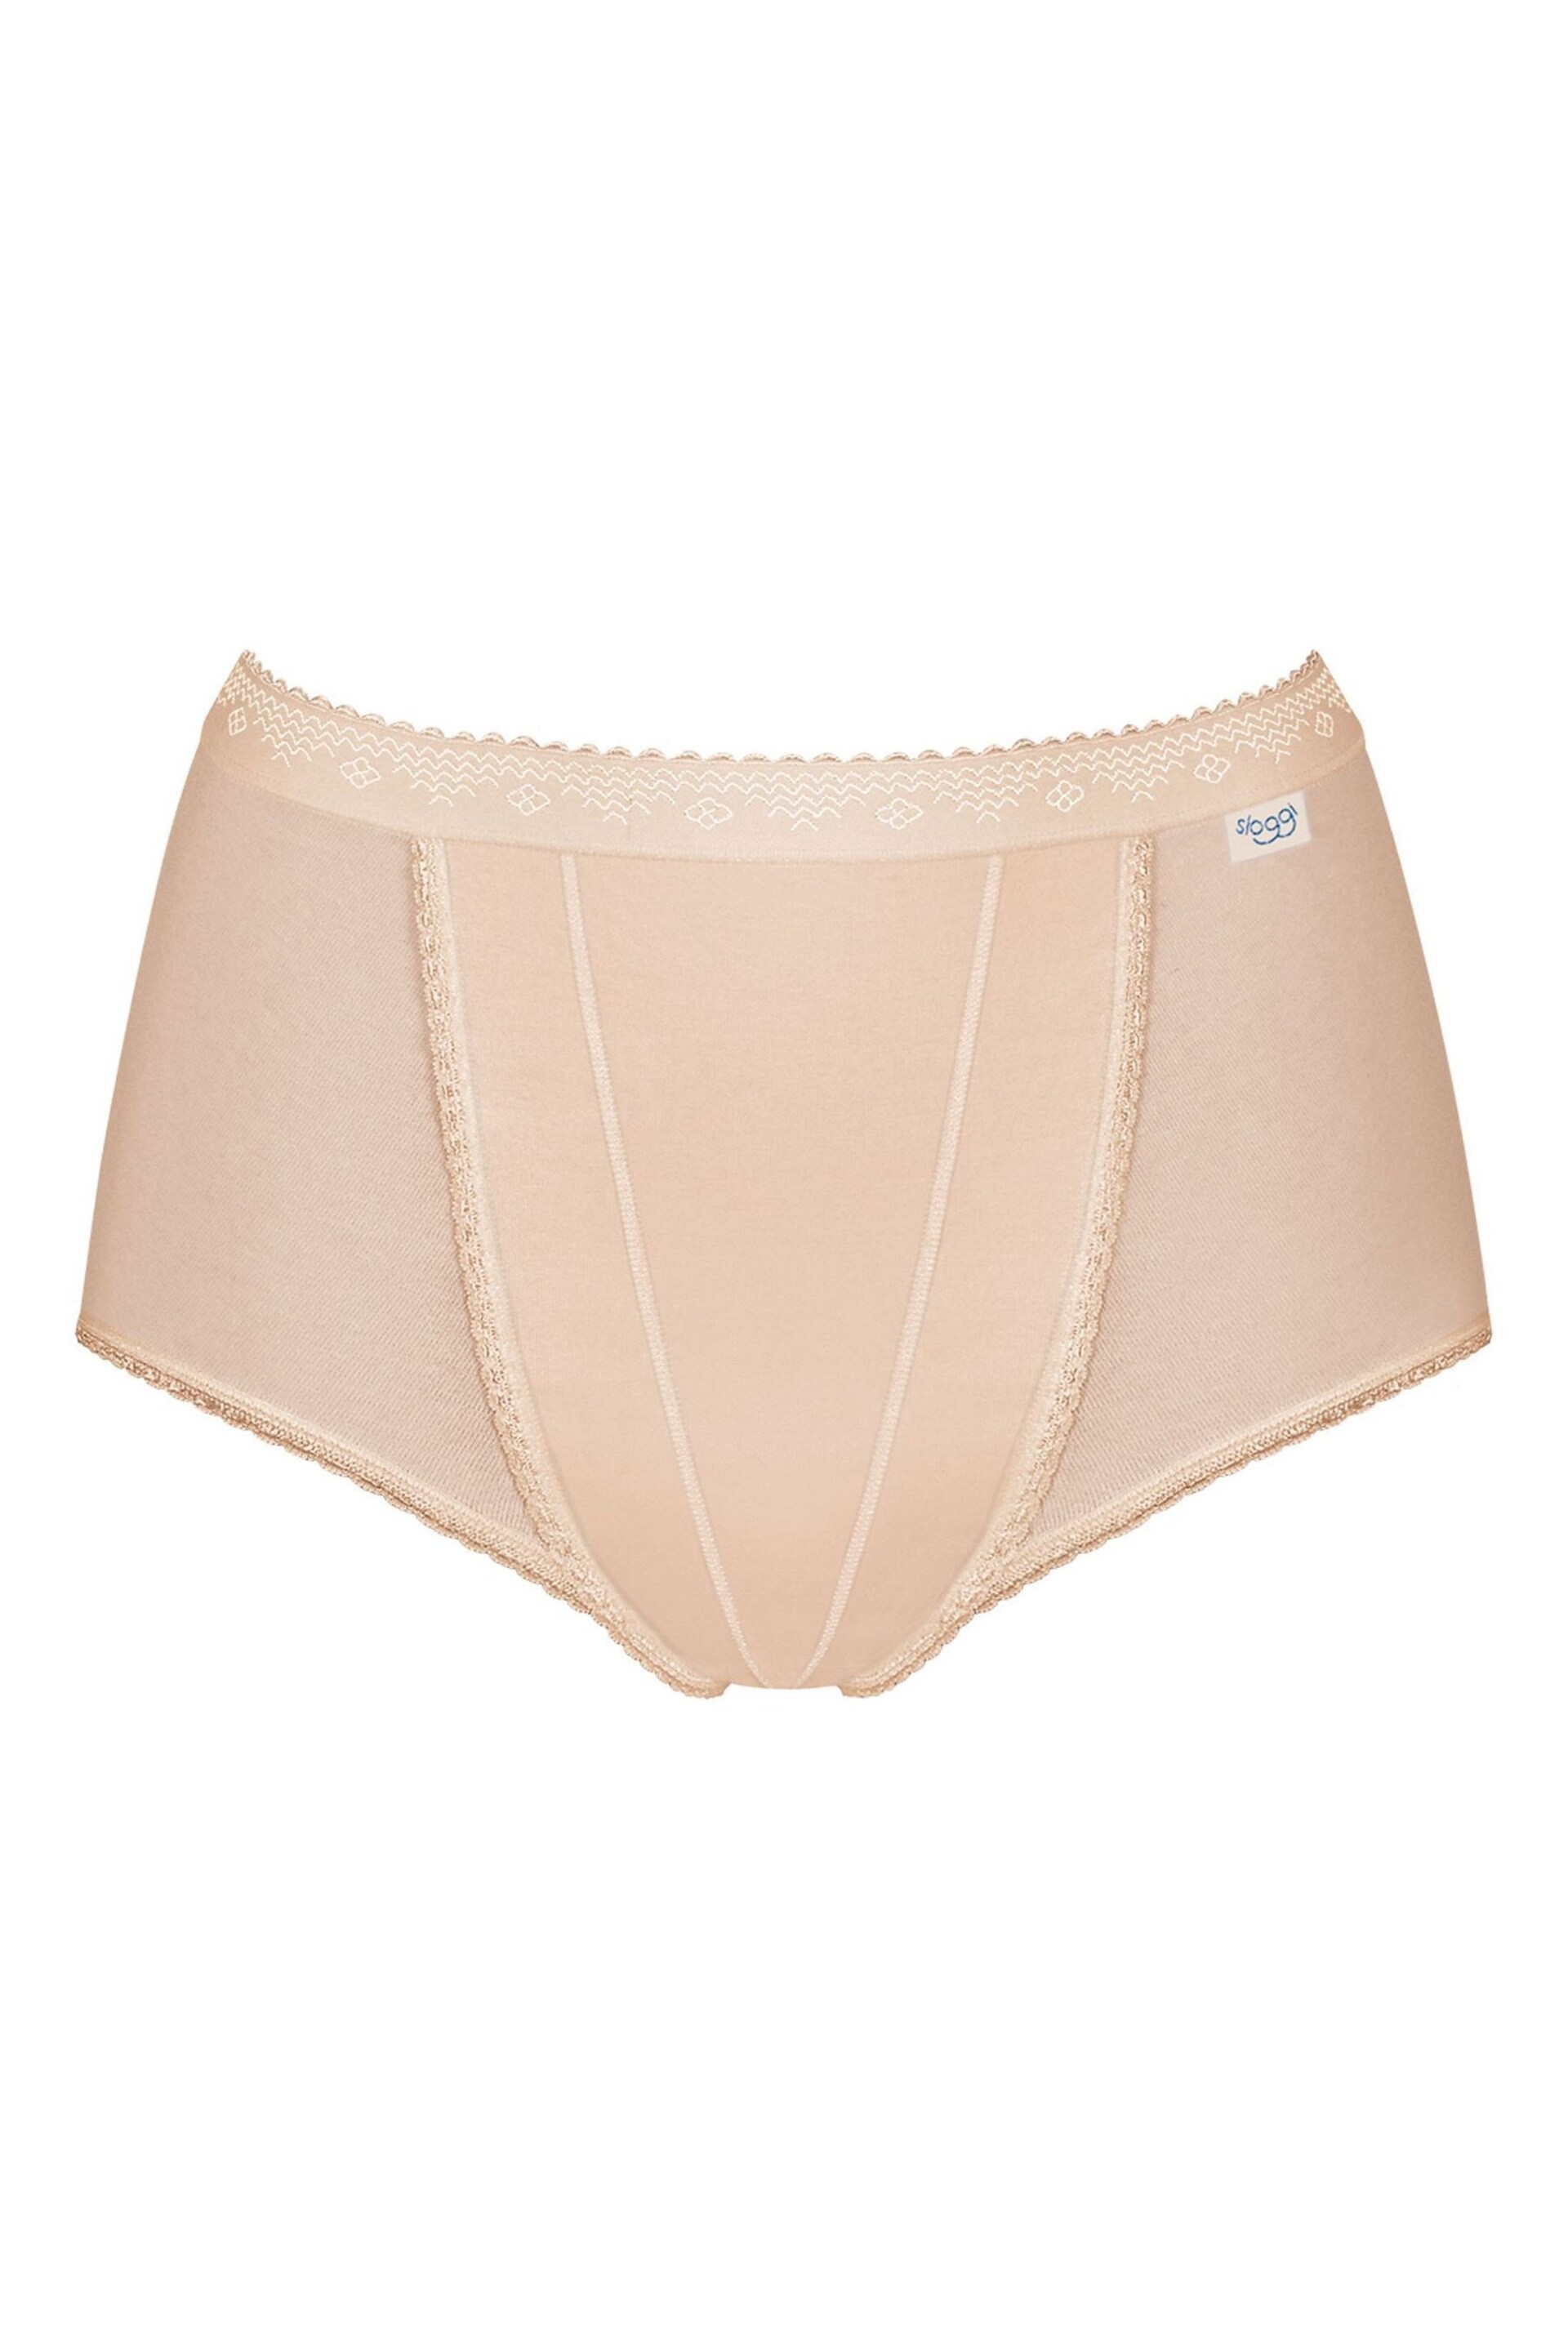 Sloggi Tummy Control 2 Pack Knickers - Image 4 of 4